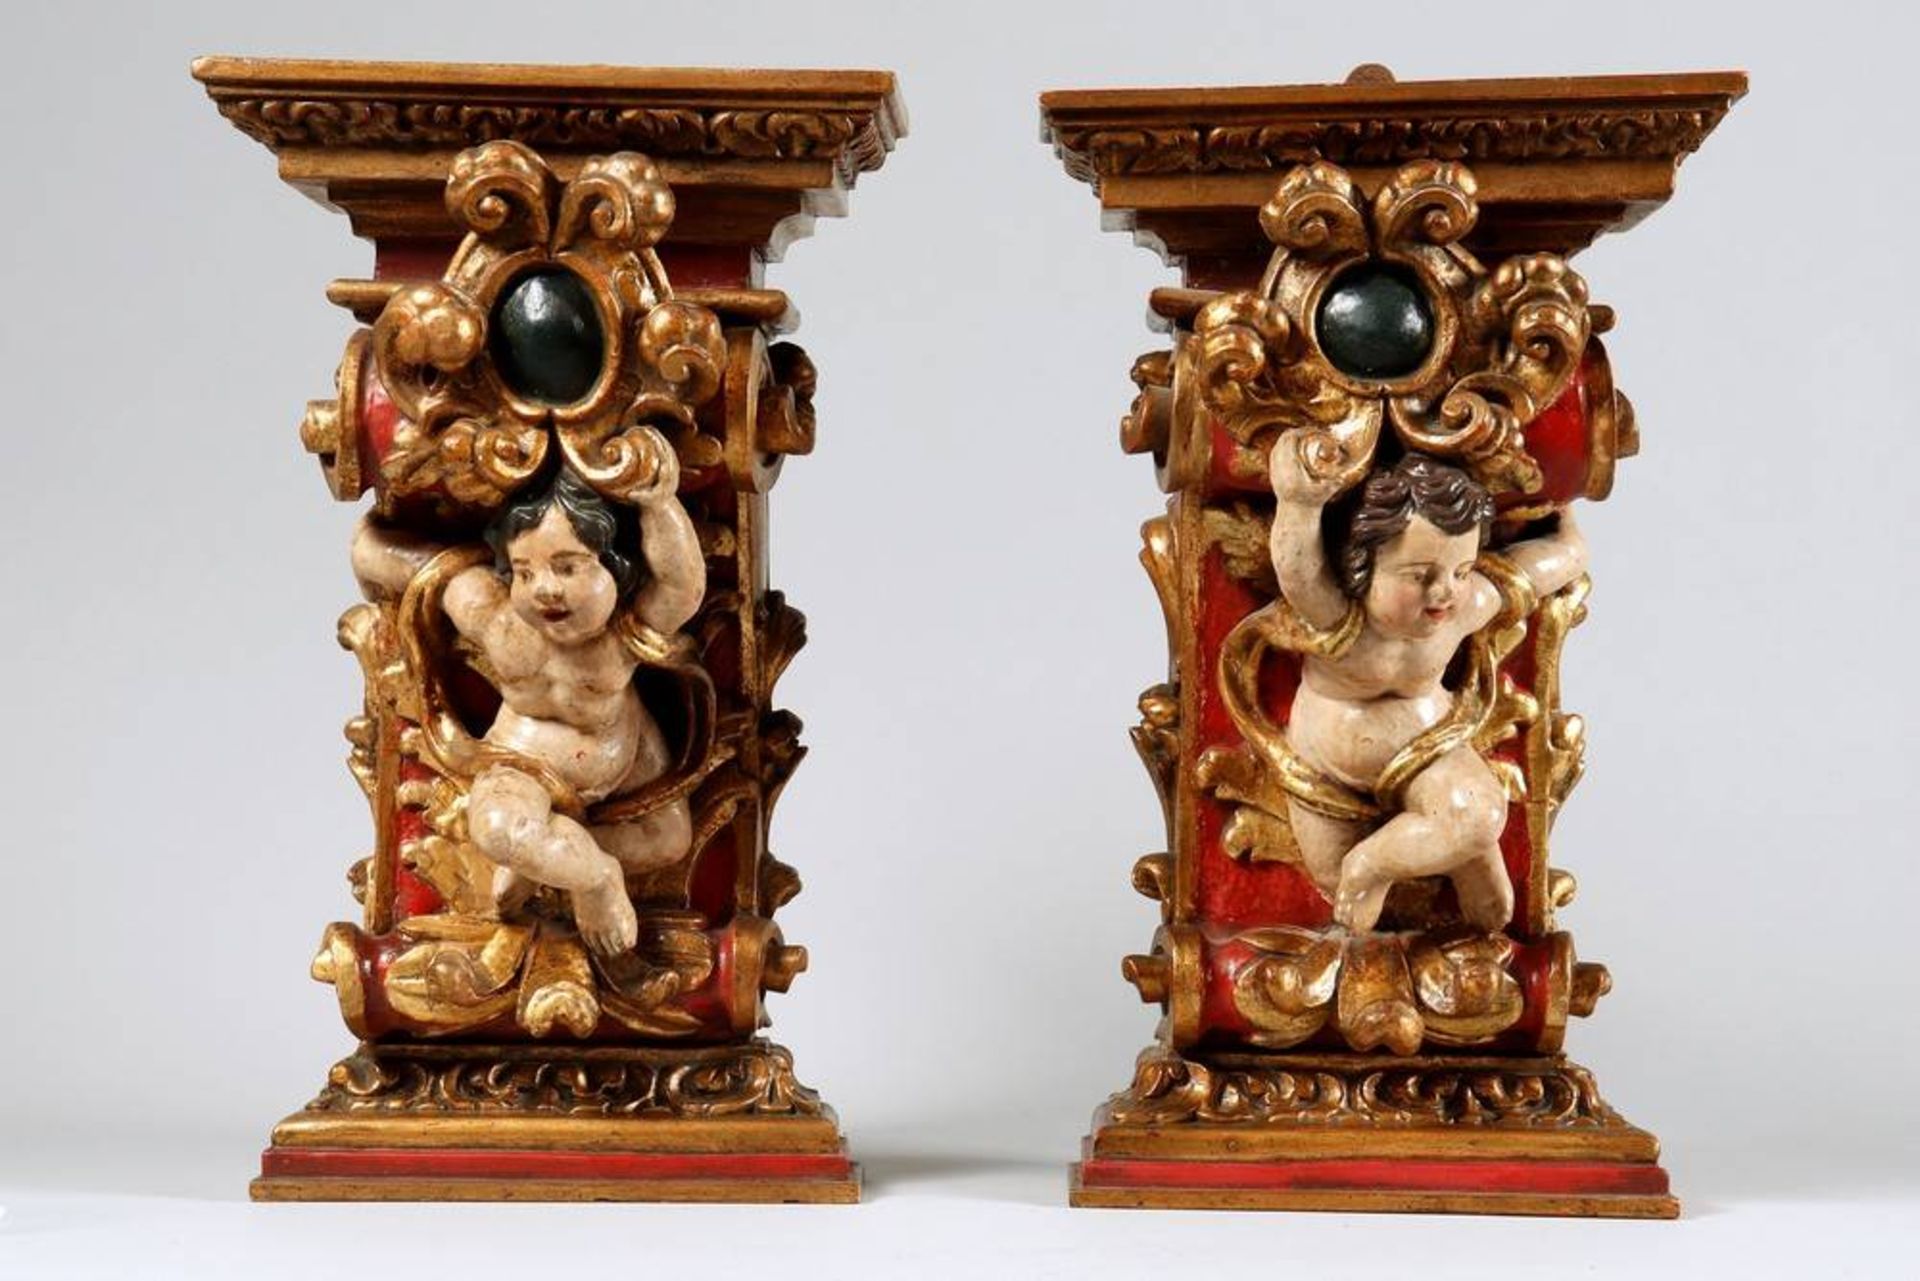 Pair of baroque wall brakets south german, poss. 18th C., gilt and painted, HxWxD: 49,5x30x18,5cm,